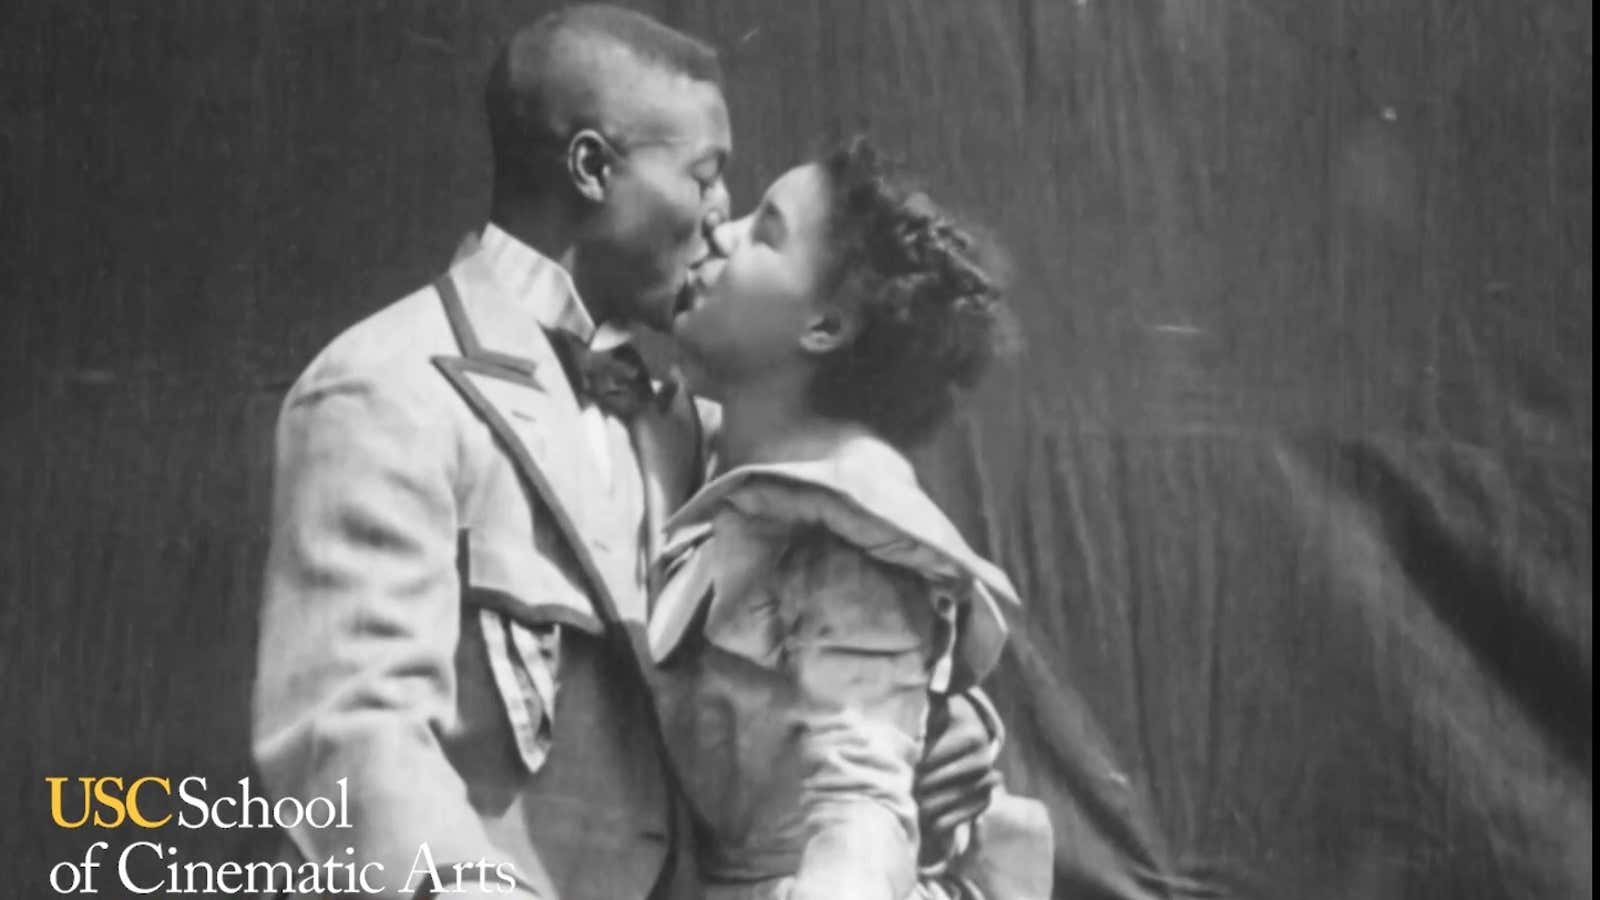 Film scholars found the earliest known on-screen depiction of African-American love